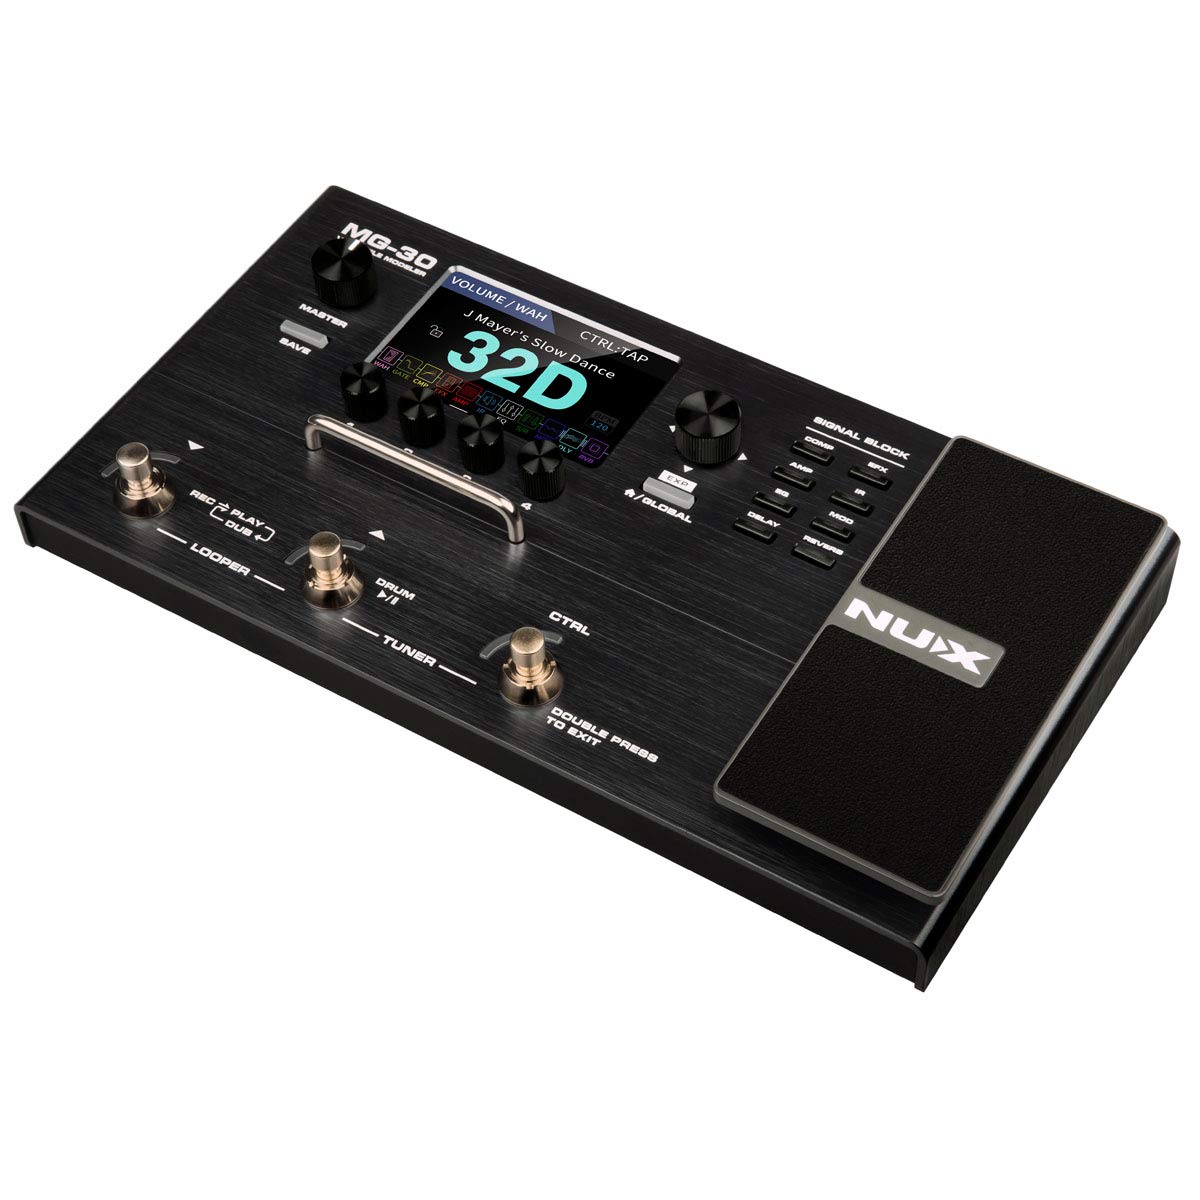 NUX MG-30 Guitar Multi-Effects Pedal Guitar/Bass/Acoustic Amp Modeling, 1024 Samples IRs, IR Loader, White-Box Algorithm, EFX Routing, 4'' Color LCD, NMP-2 Footswitch Included